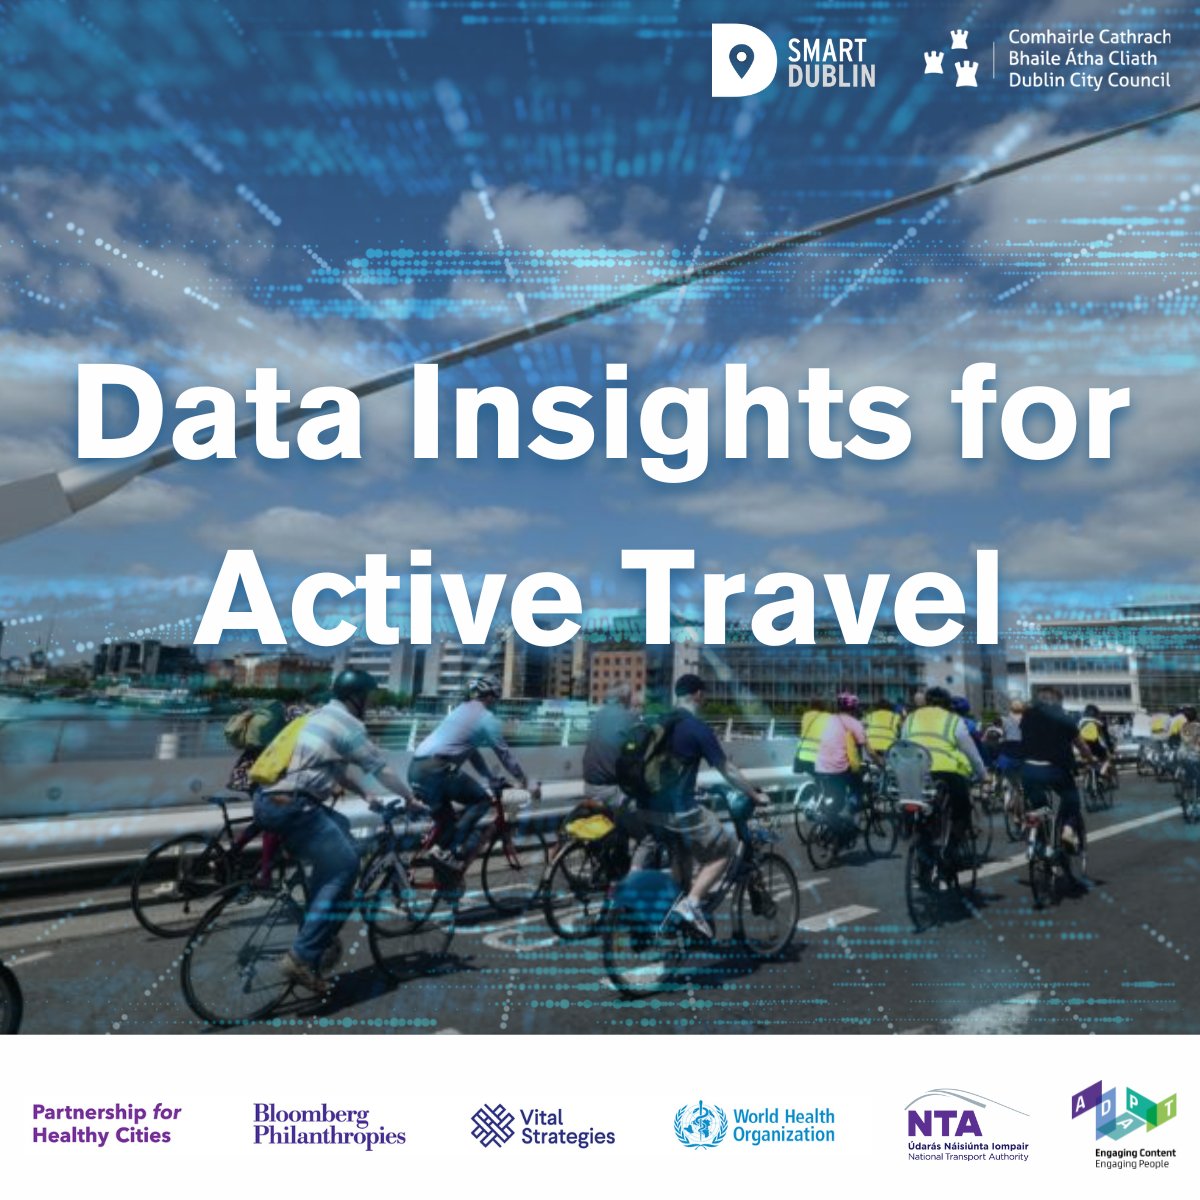 🚲 Exciting News! 🚶 Dublin City Council launches Data Insights for Active Travel initiative! Developing a data toolkit will increase awareness of active travel patterns & aid improving policy to deliver walking & cycling projects across the city. For more visit…